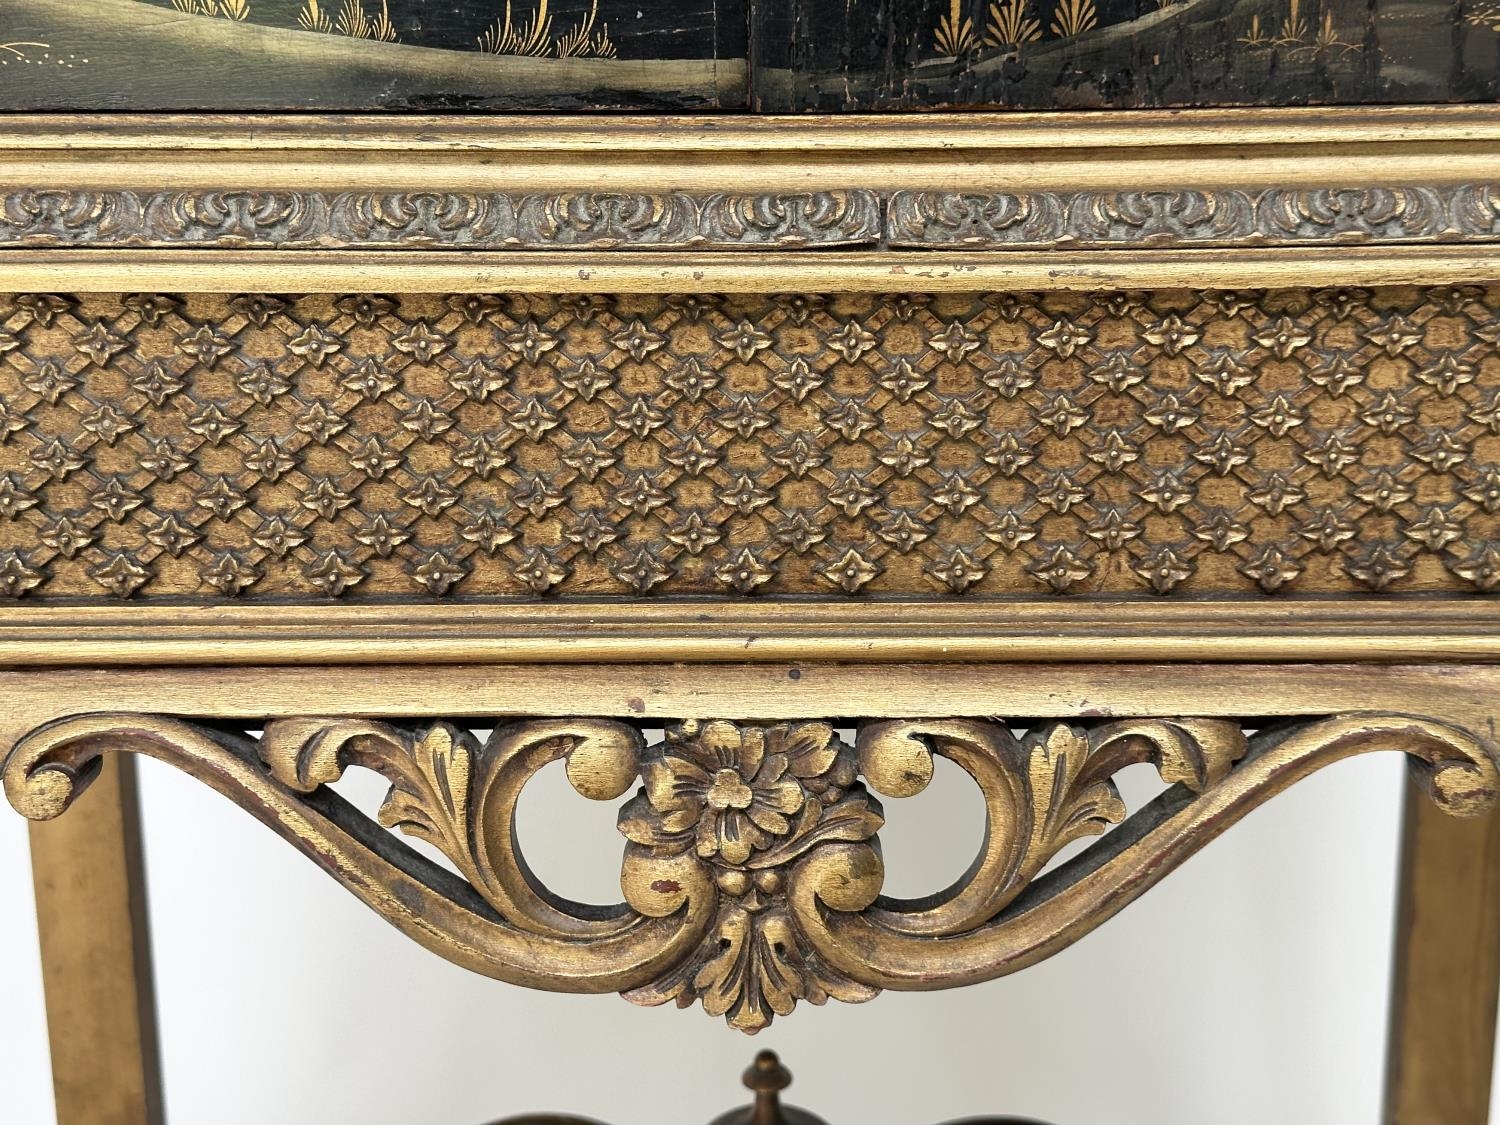 CABINET ON STAND, early 20th century English lacquered and gilt chinoiserie decorated, silvered - Image 4 of 11